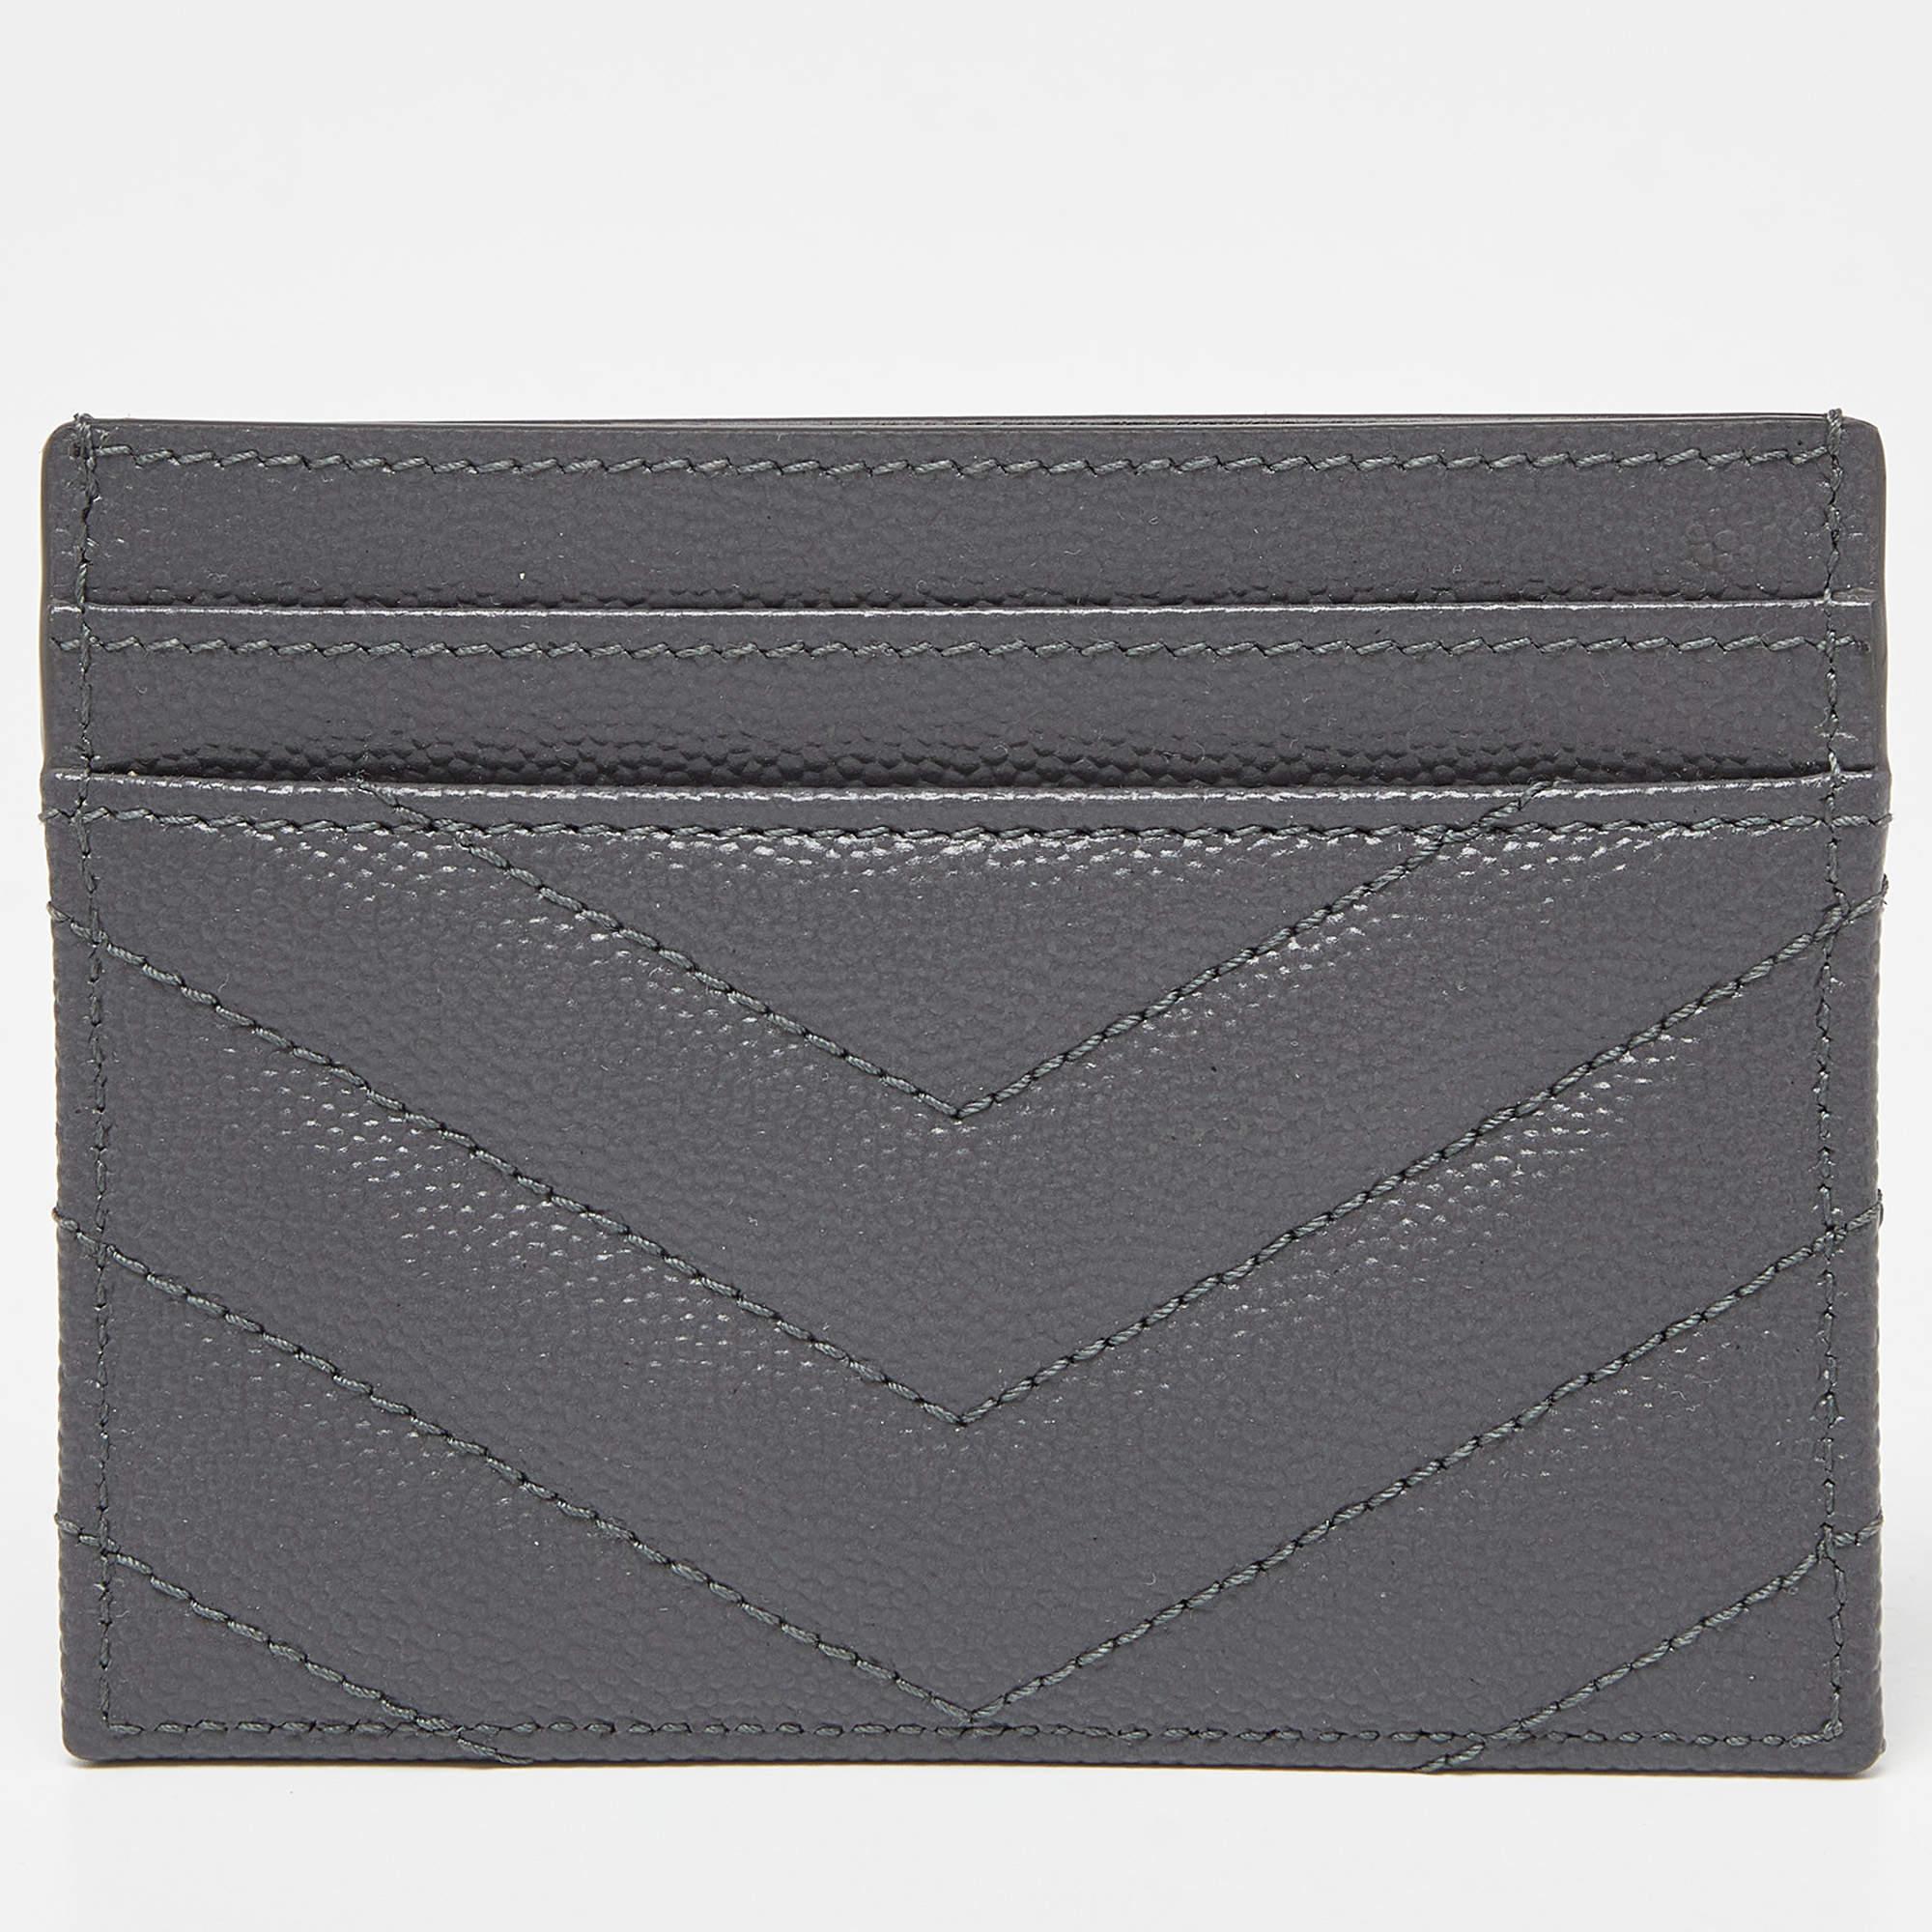 This stylish Saint Laurent card holder has been crafted from fine materials. It has ample slots that can easily hold your cards.

